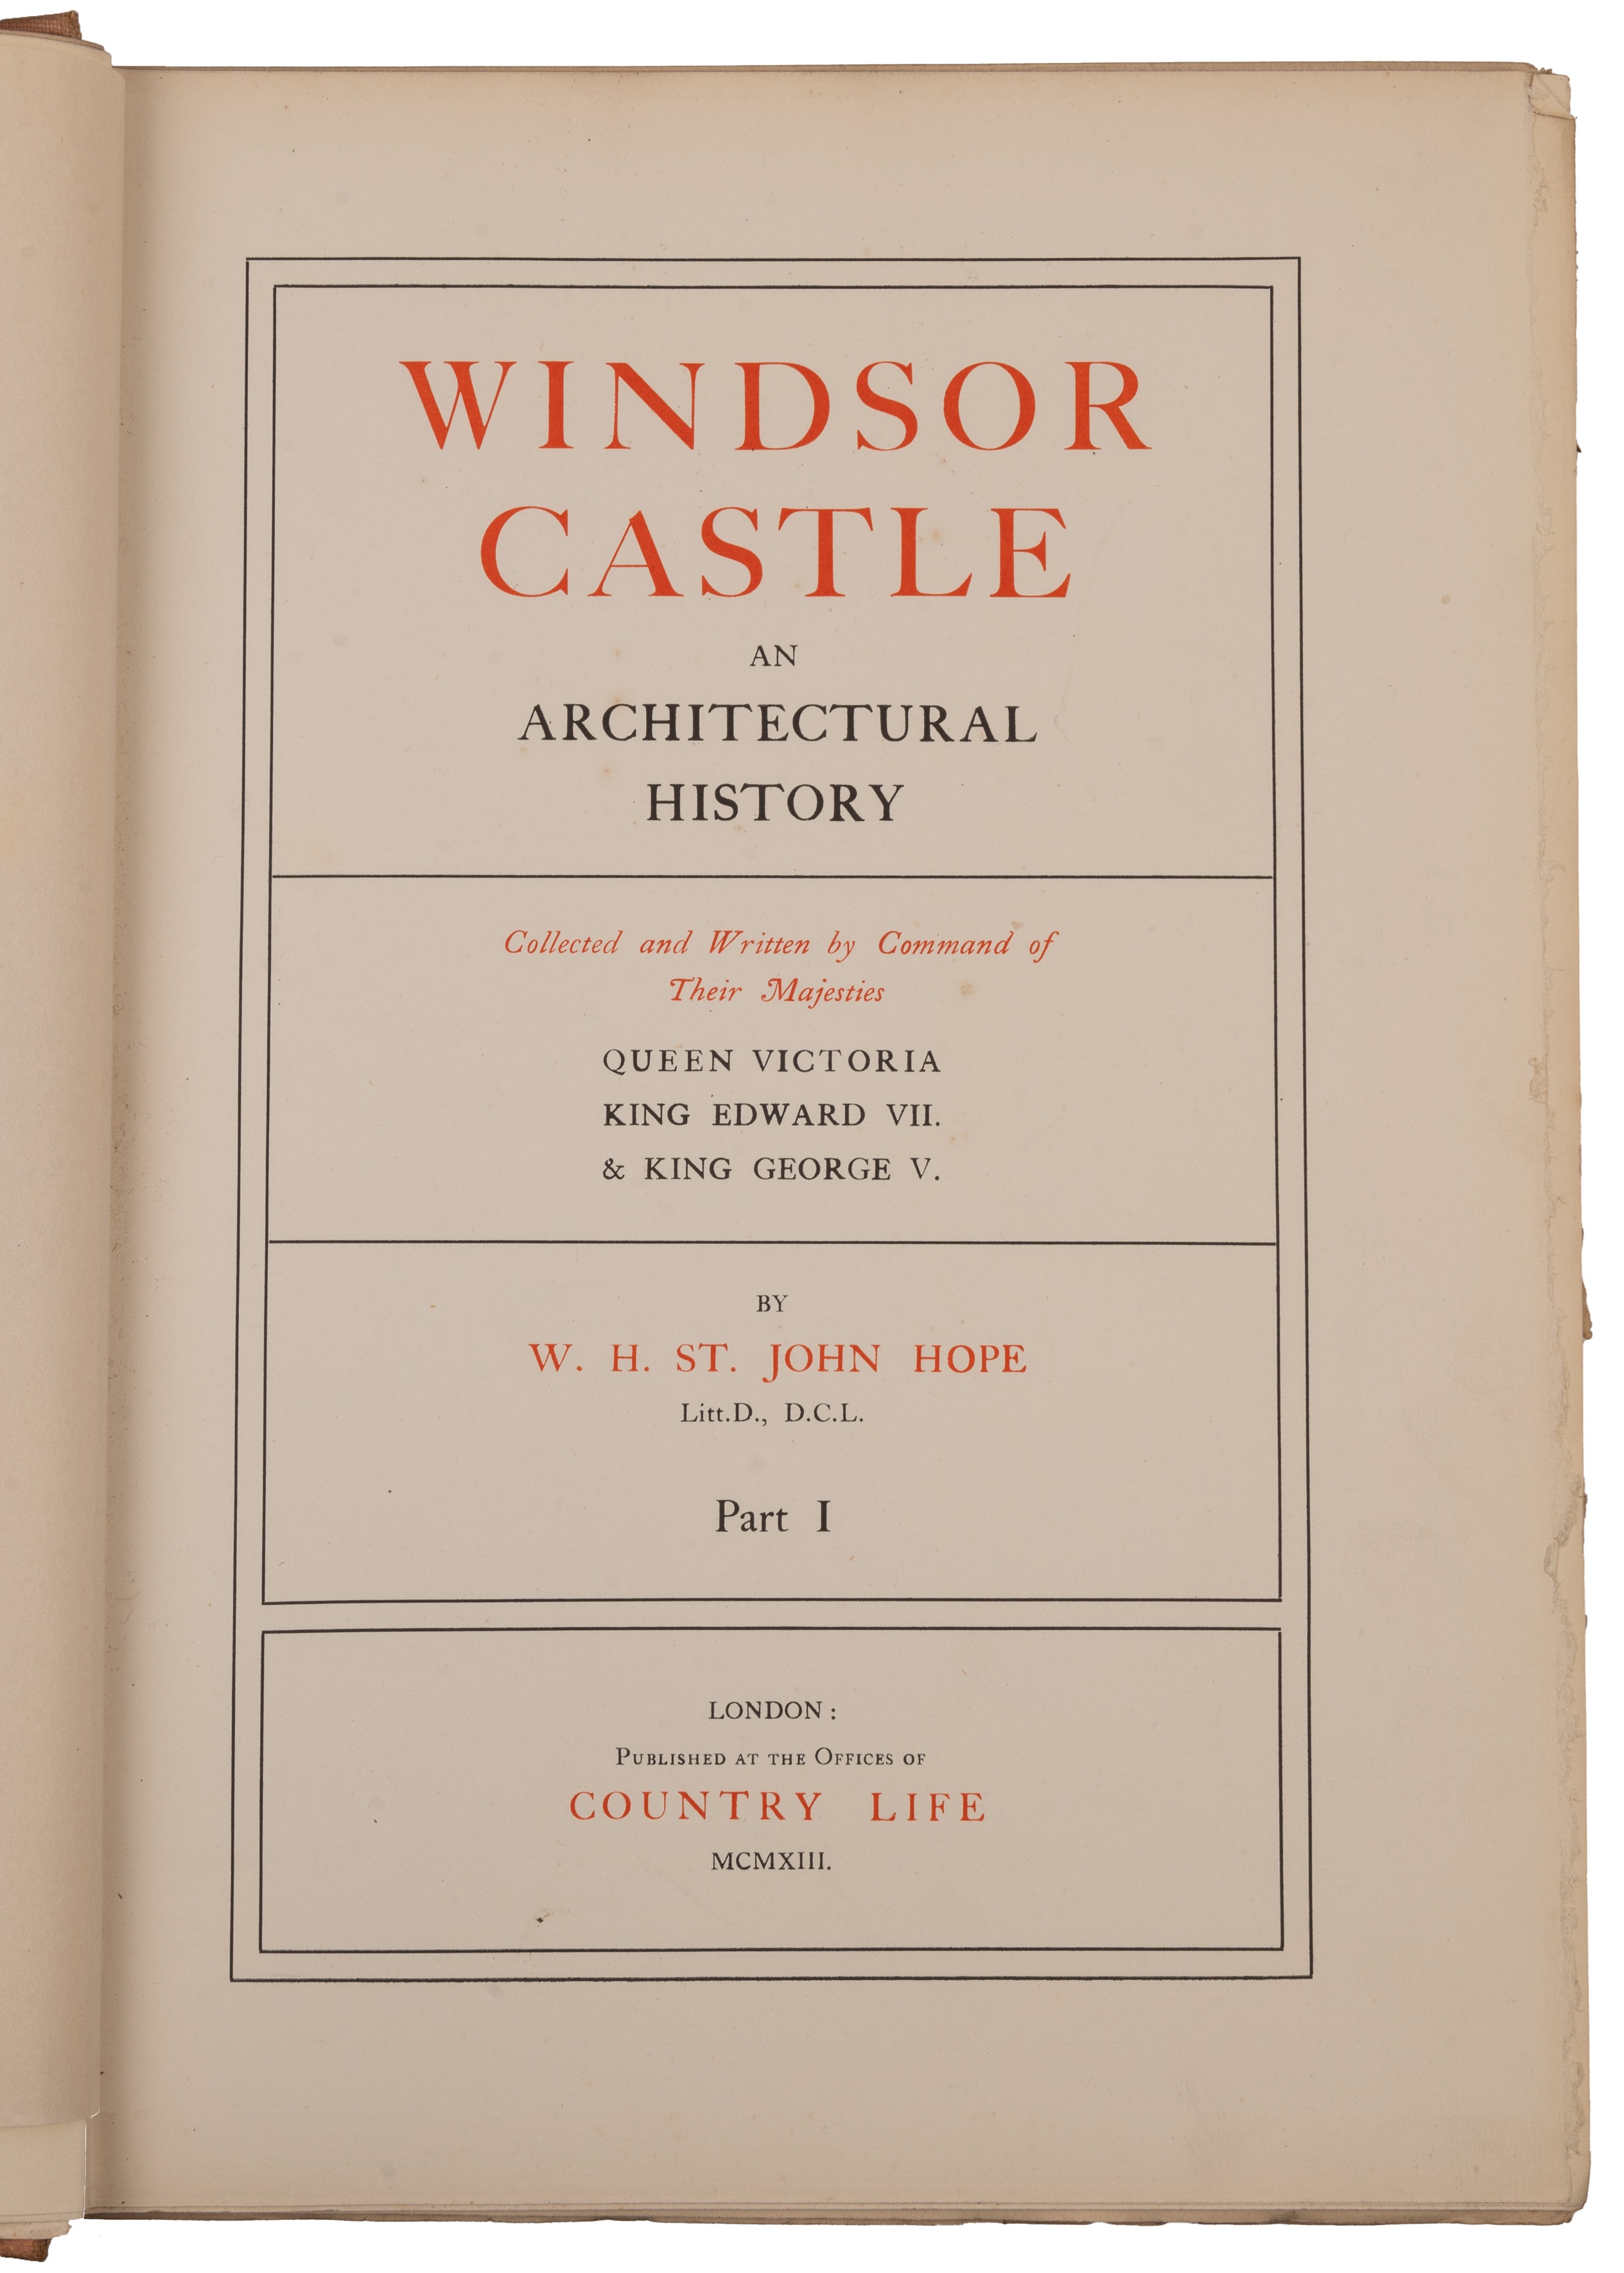 St John Hope (W.H.) 'Windsor Castle, An Architectural History' Country Life, London 1913. 2 vols. - Image 7 of 9